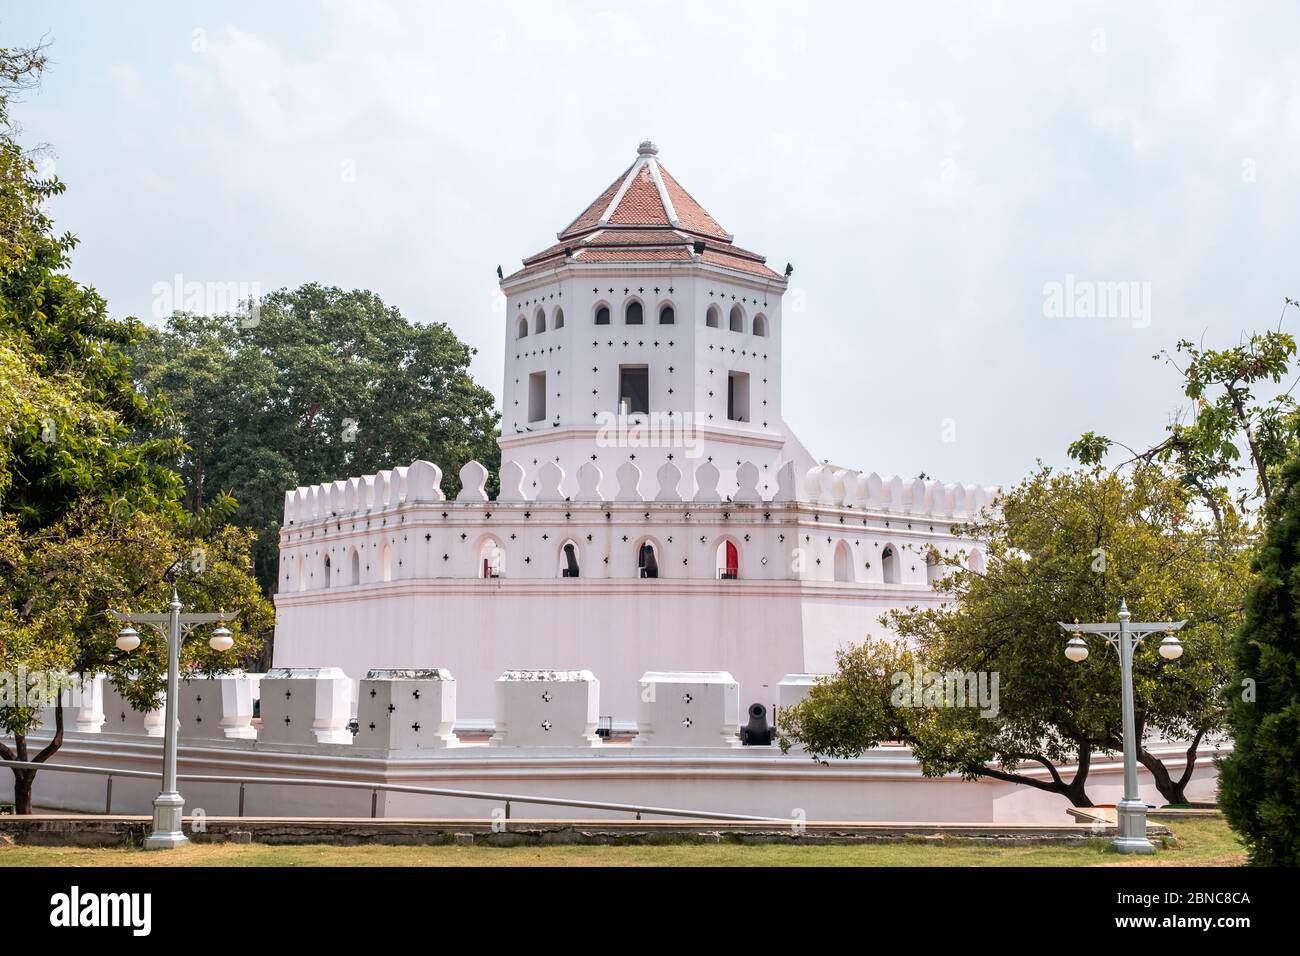 Phra Sumen Fort is historical white castle in Bangkok Downtown Stock Photo